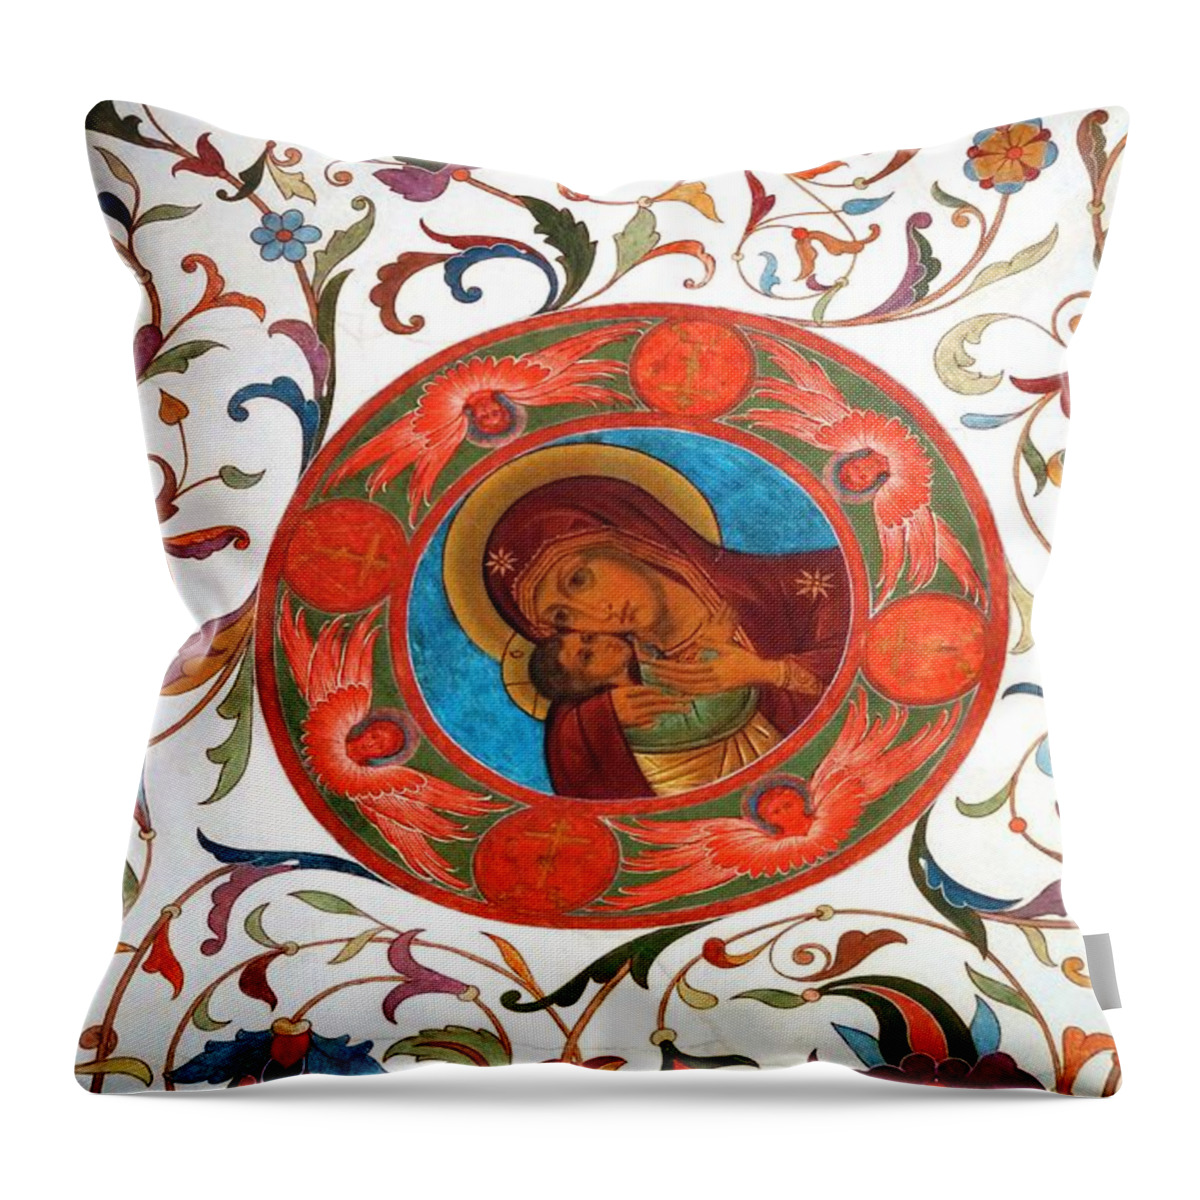 Madonna Throw Pillow featuring the photograph Madonna by Julia Ivanovna Willhite